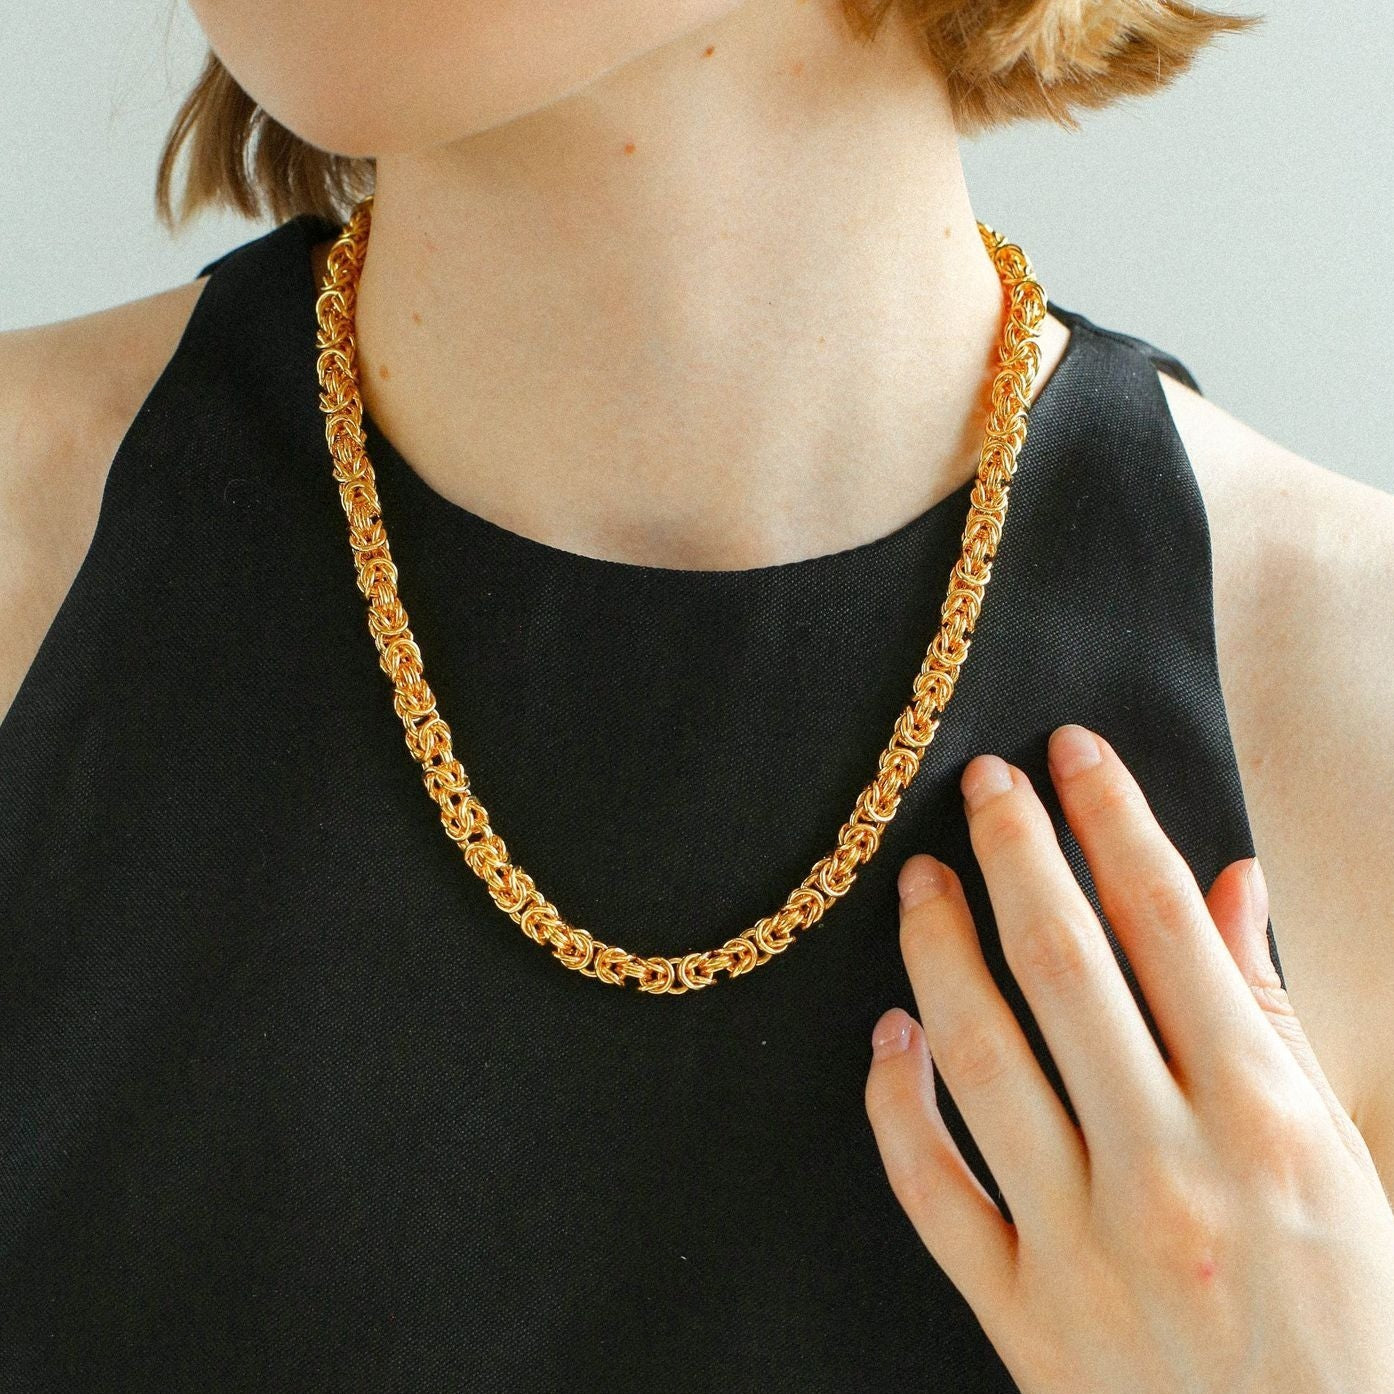 Fashionable Handcrafted Artisan Chunky Chain Necklace